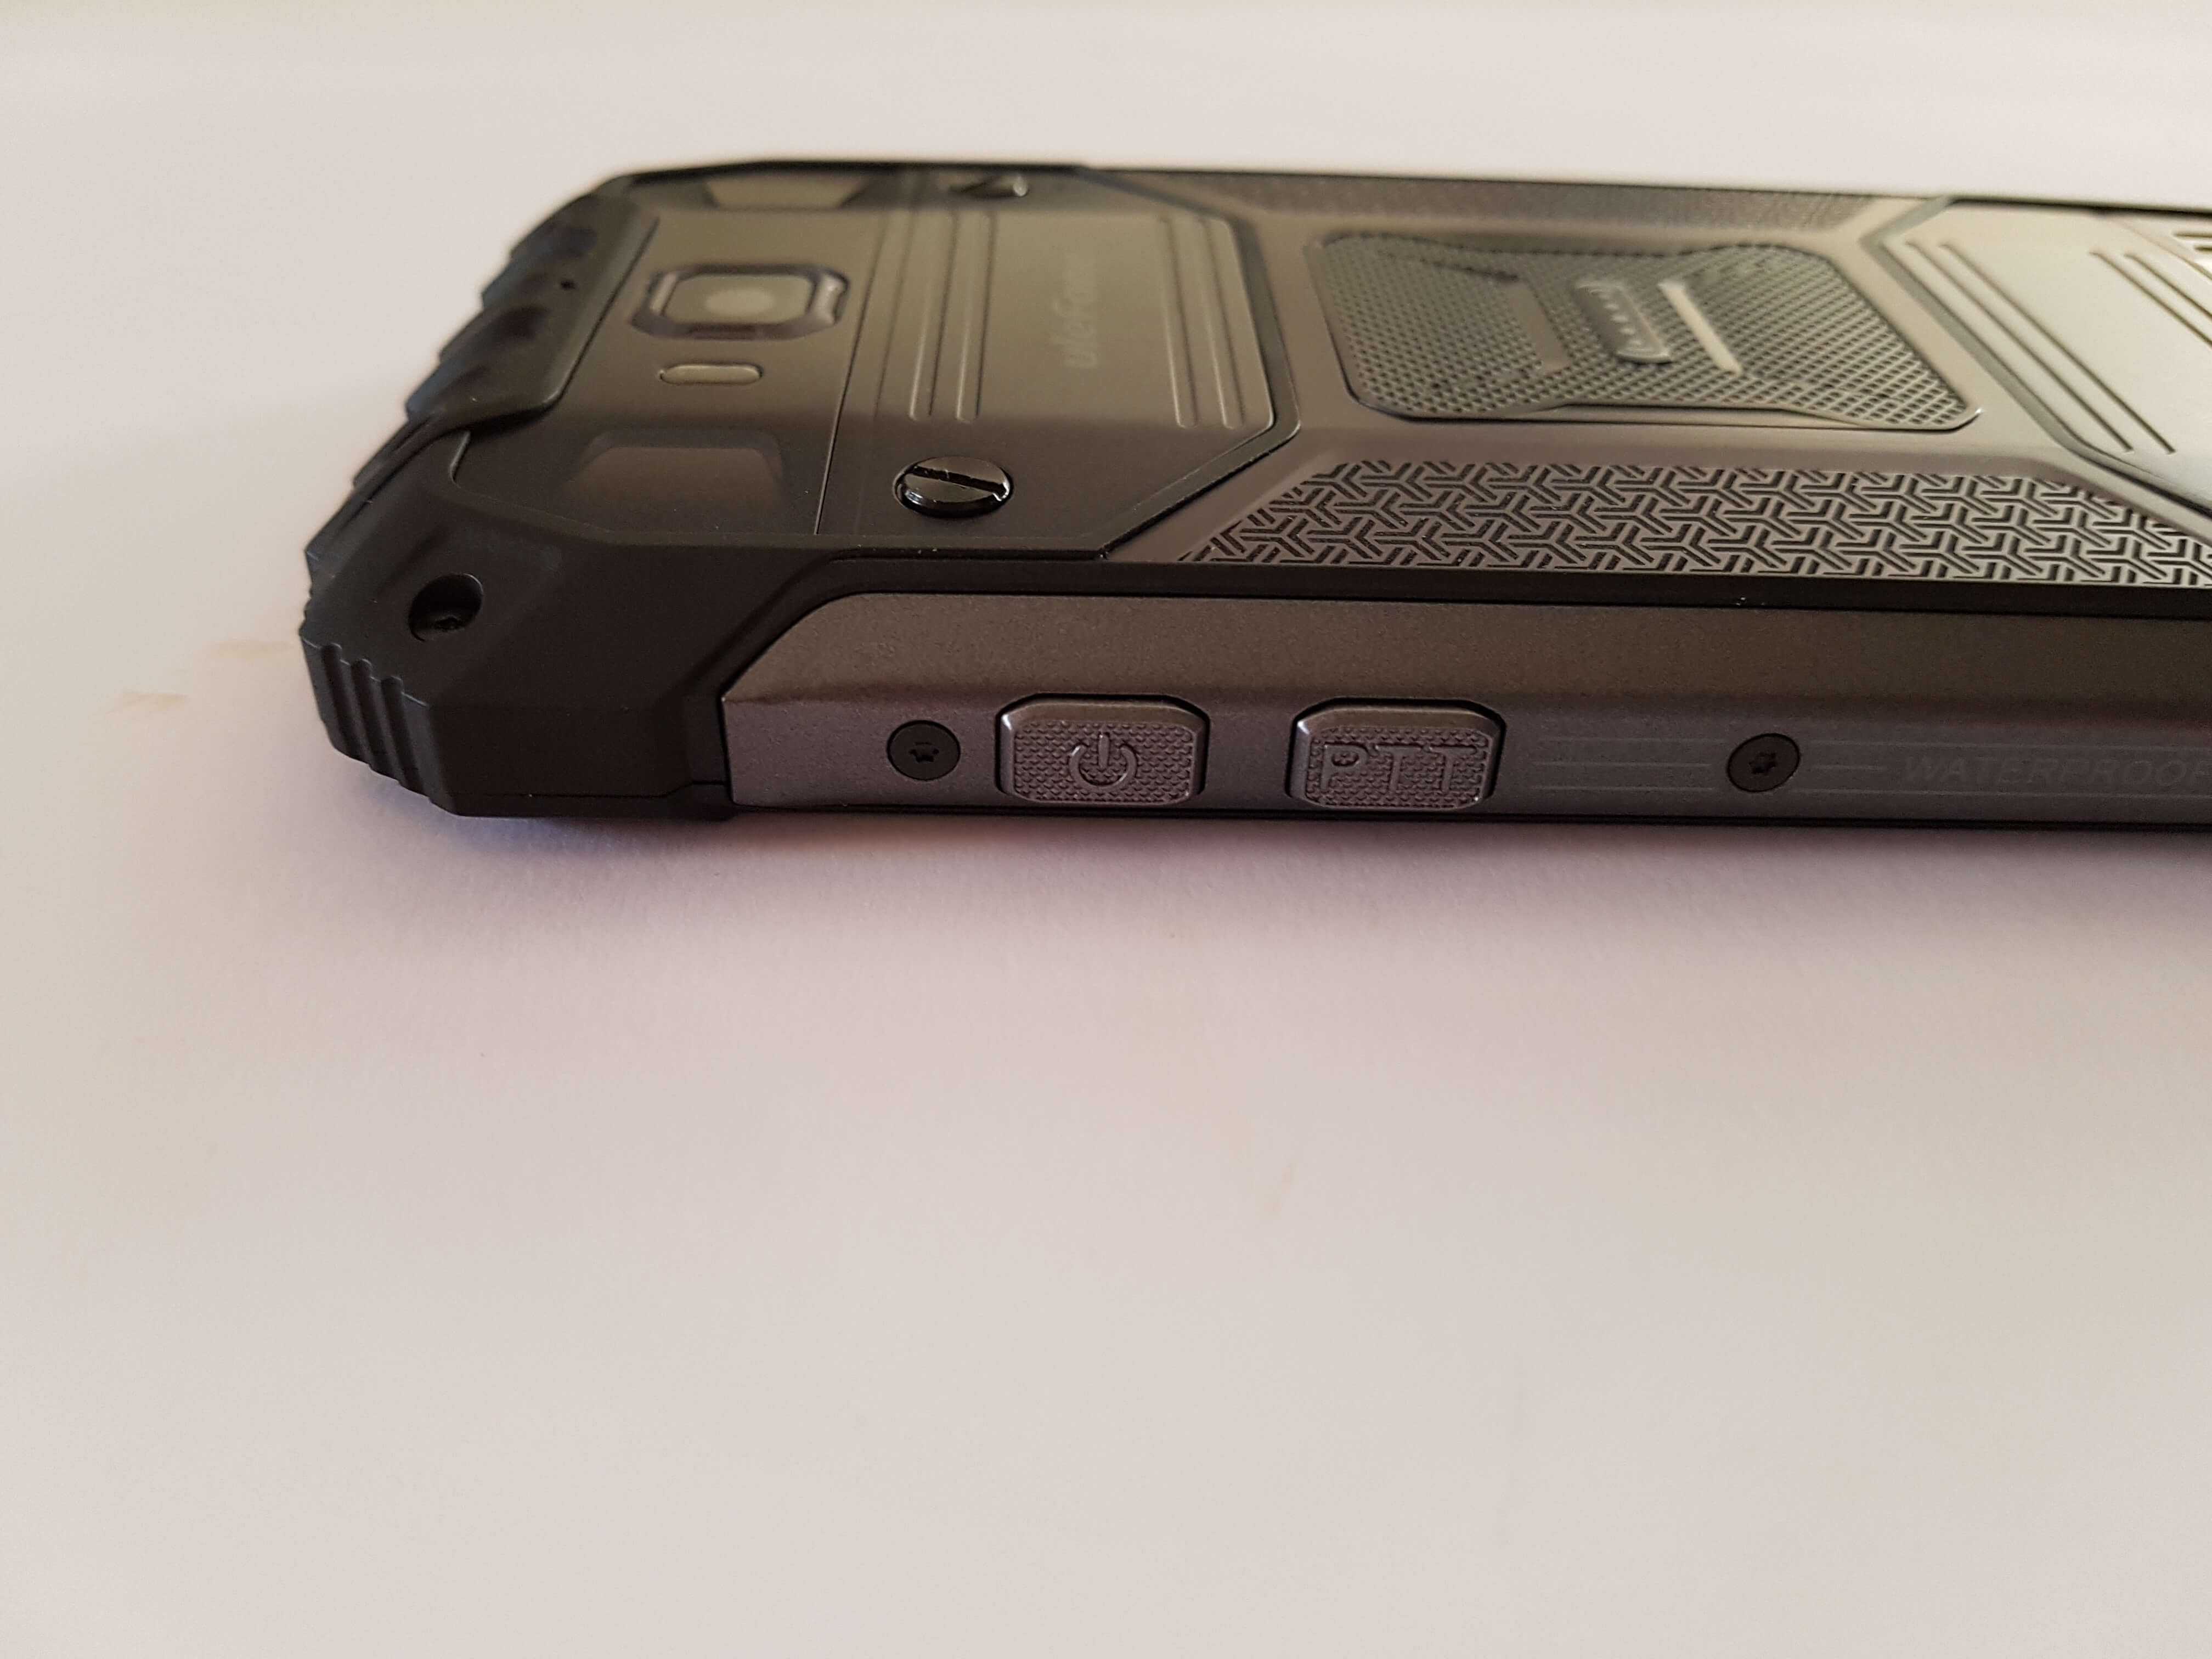 Ulefone-Armor-2-review